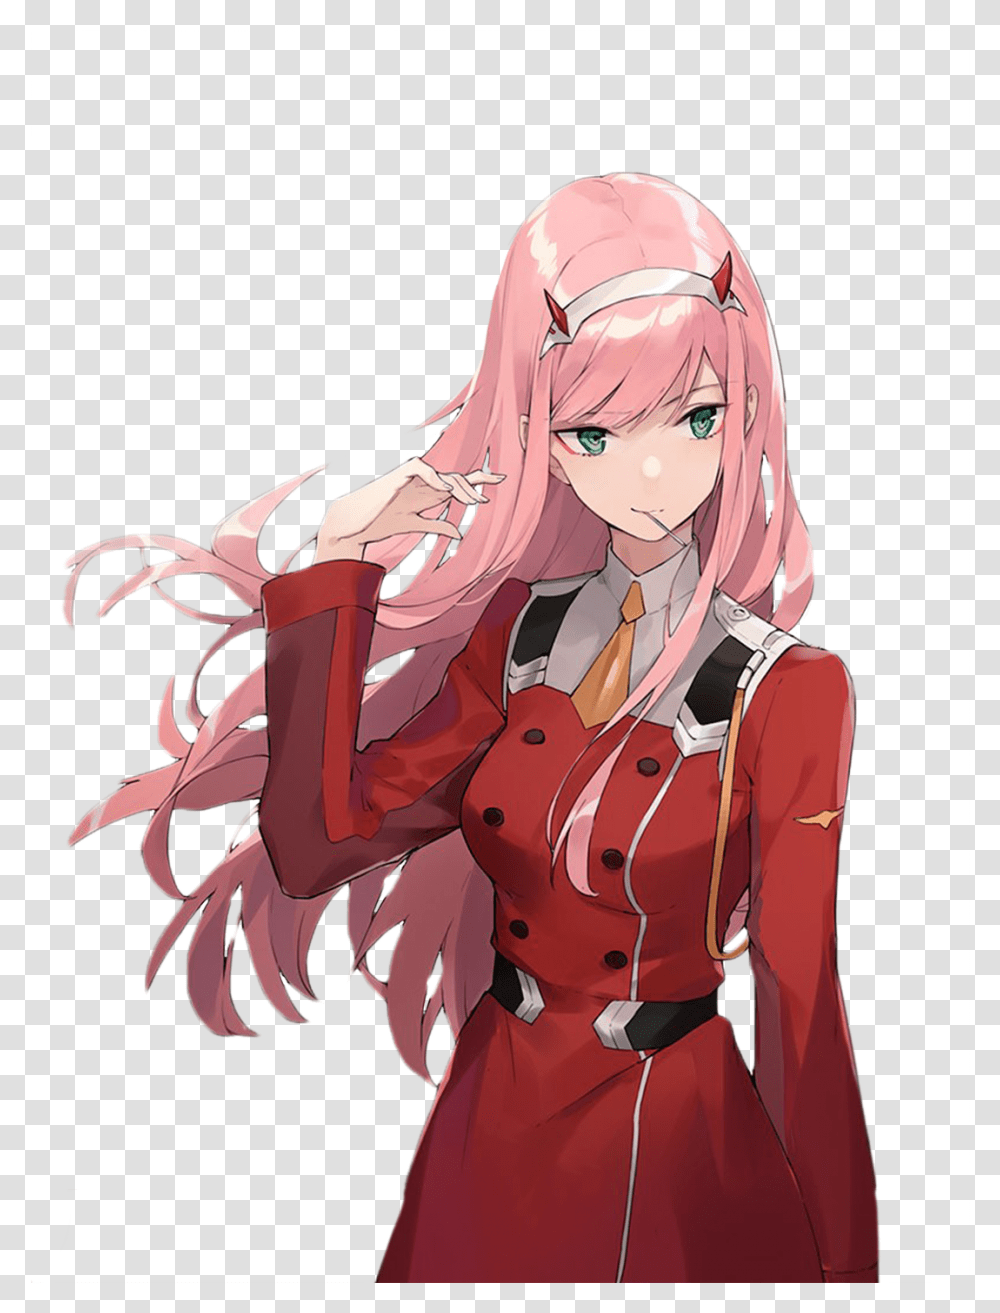 Hd Wallpaper Background Image Zero Two Darling In The Franxx, Apparel, Manga, Comics Transparent Png